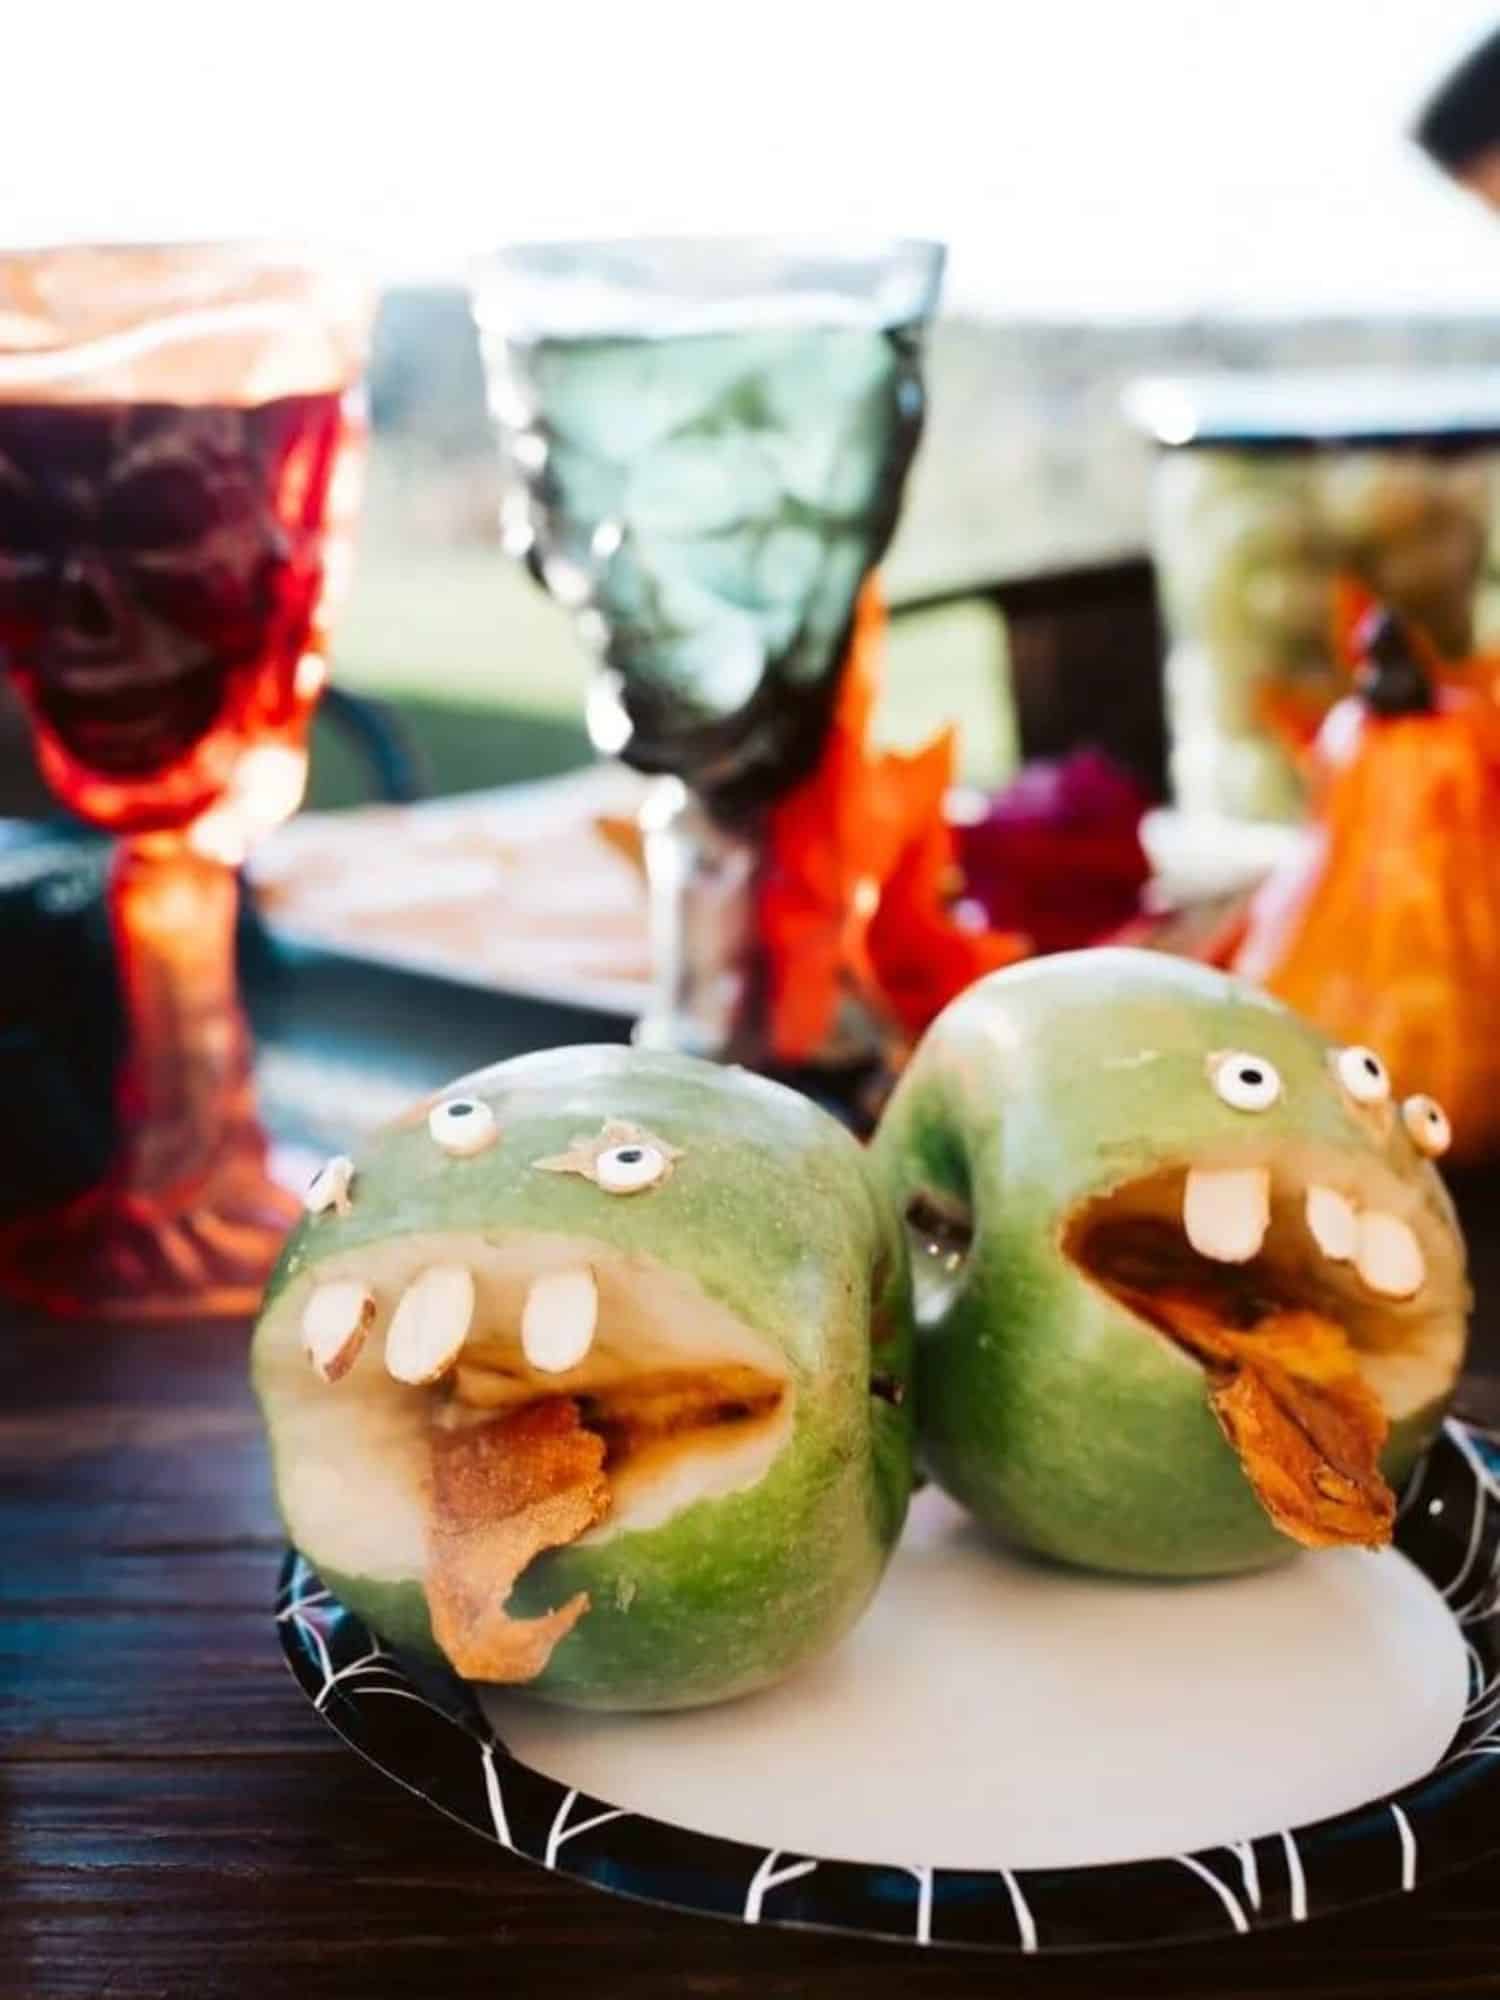 apples made into monsters